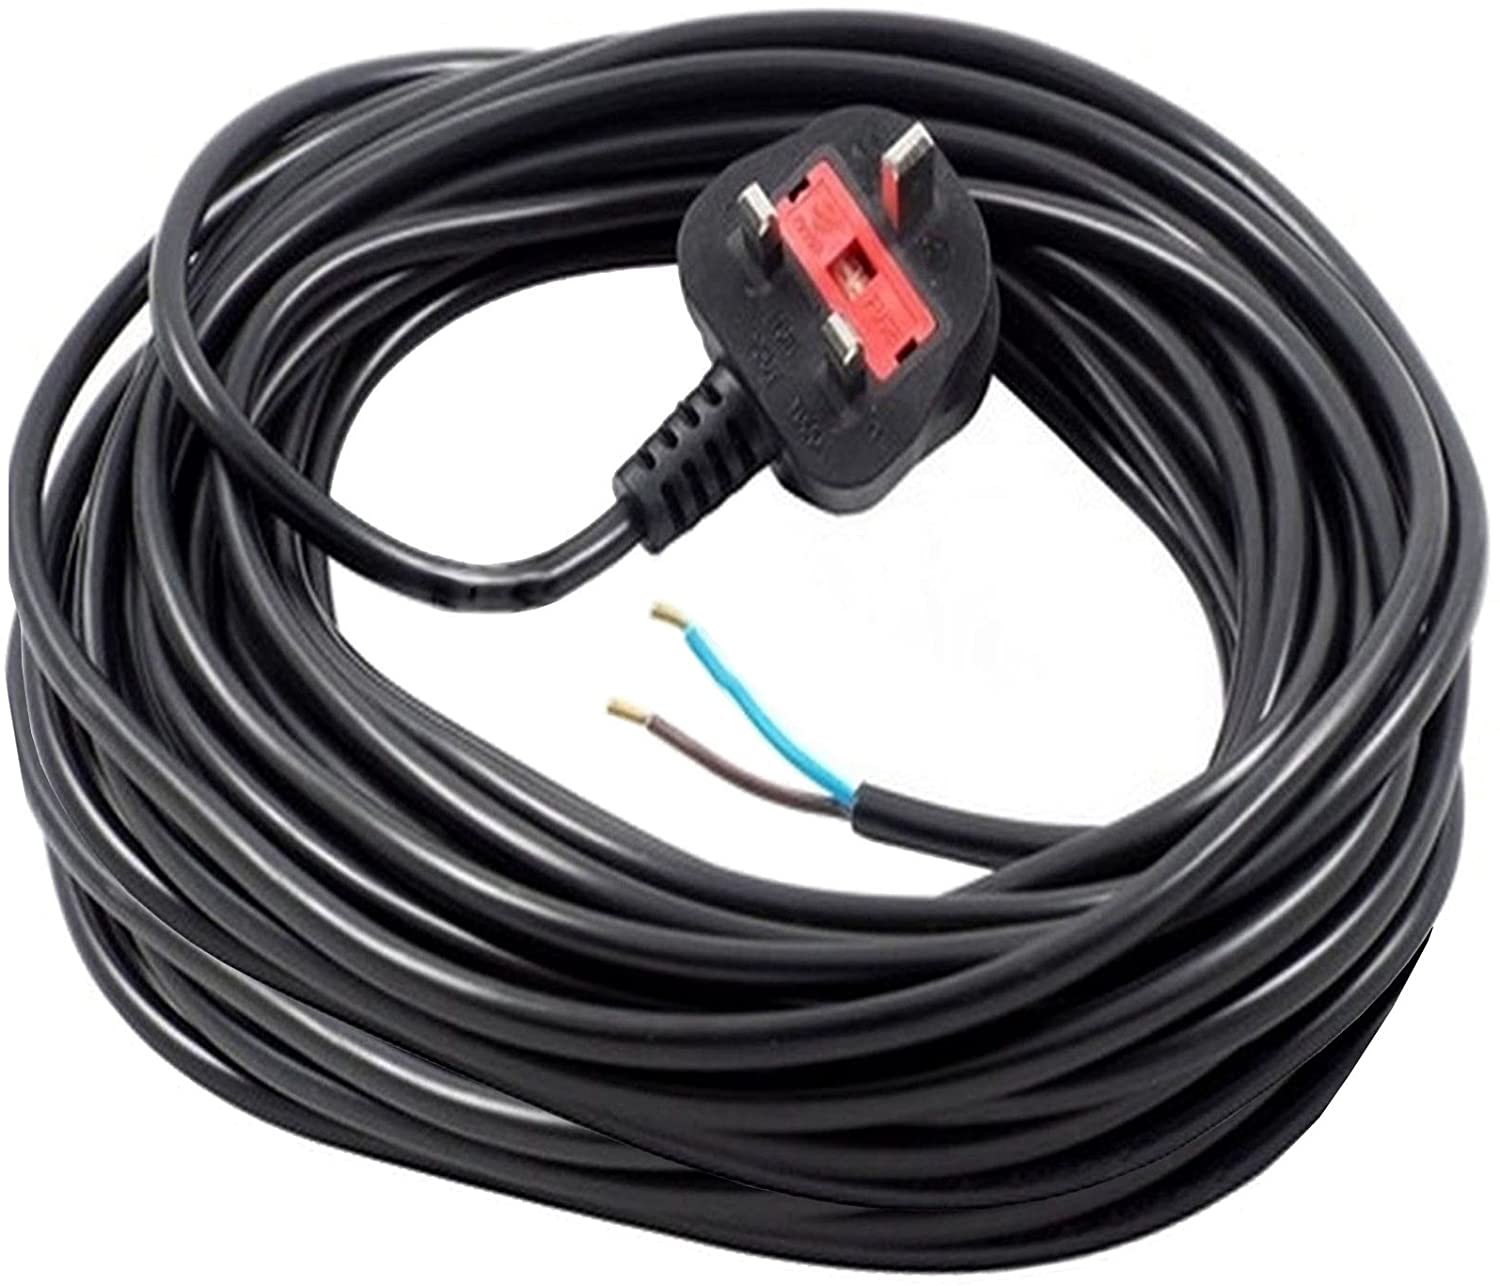 XL Extra Long 12M Metre Black Cable Mains Power Lead for Spear & Jackson Lawnmower & Garden Strimmer (UK Plug)